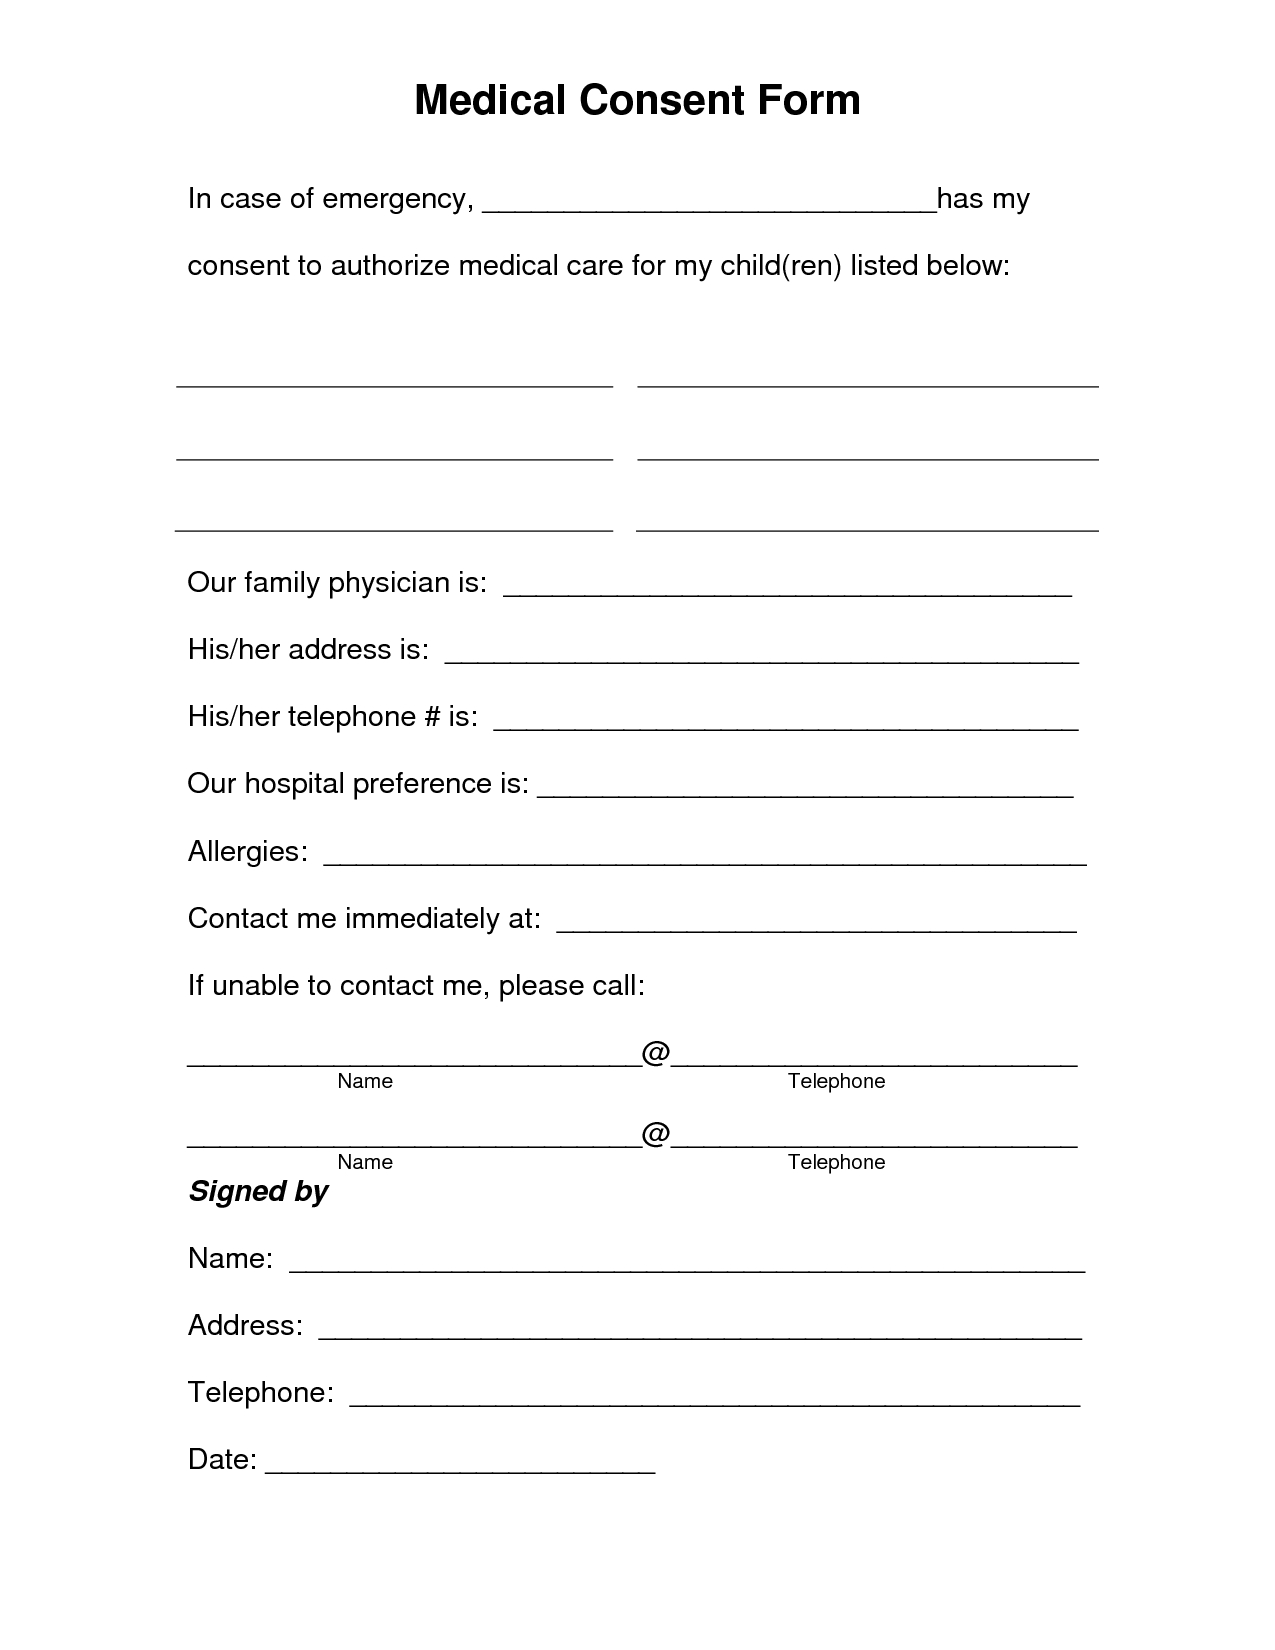 Free Printable Medical Consent Form | Free Medical Consent Form - Find Free Printable Forms Online